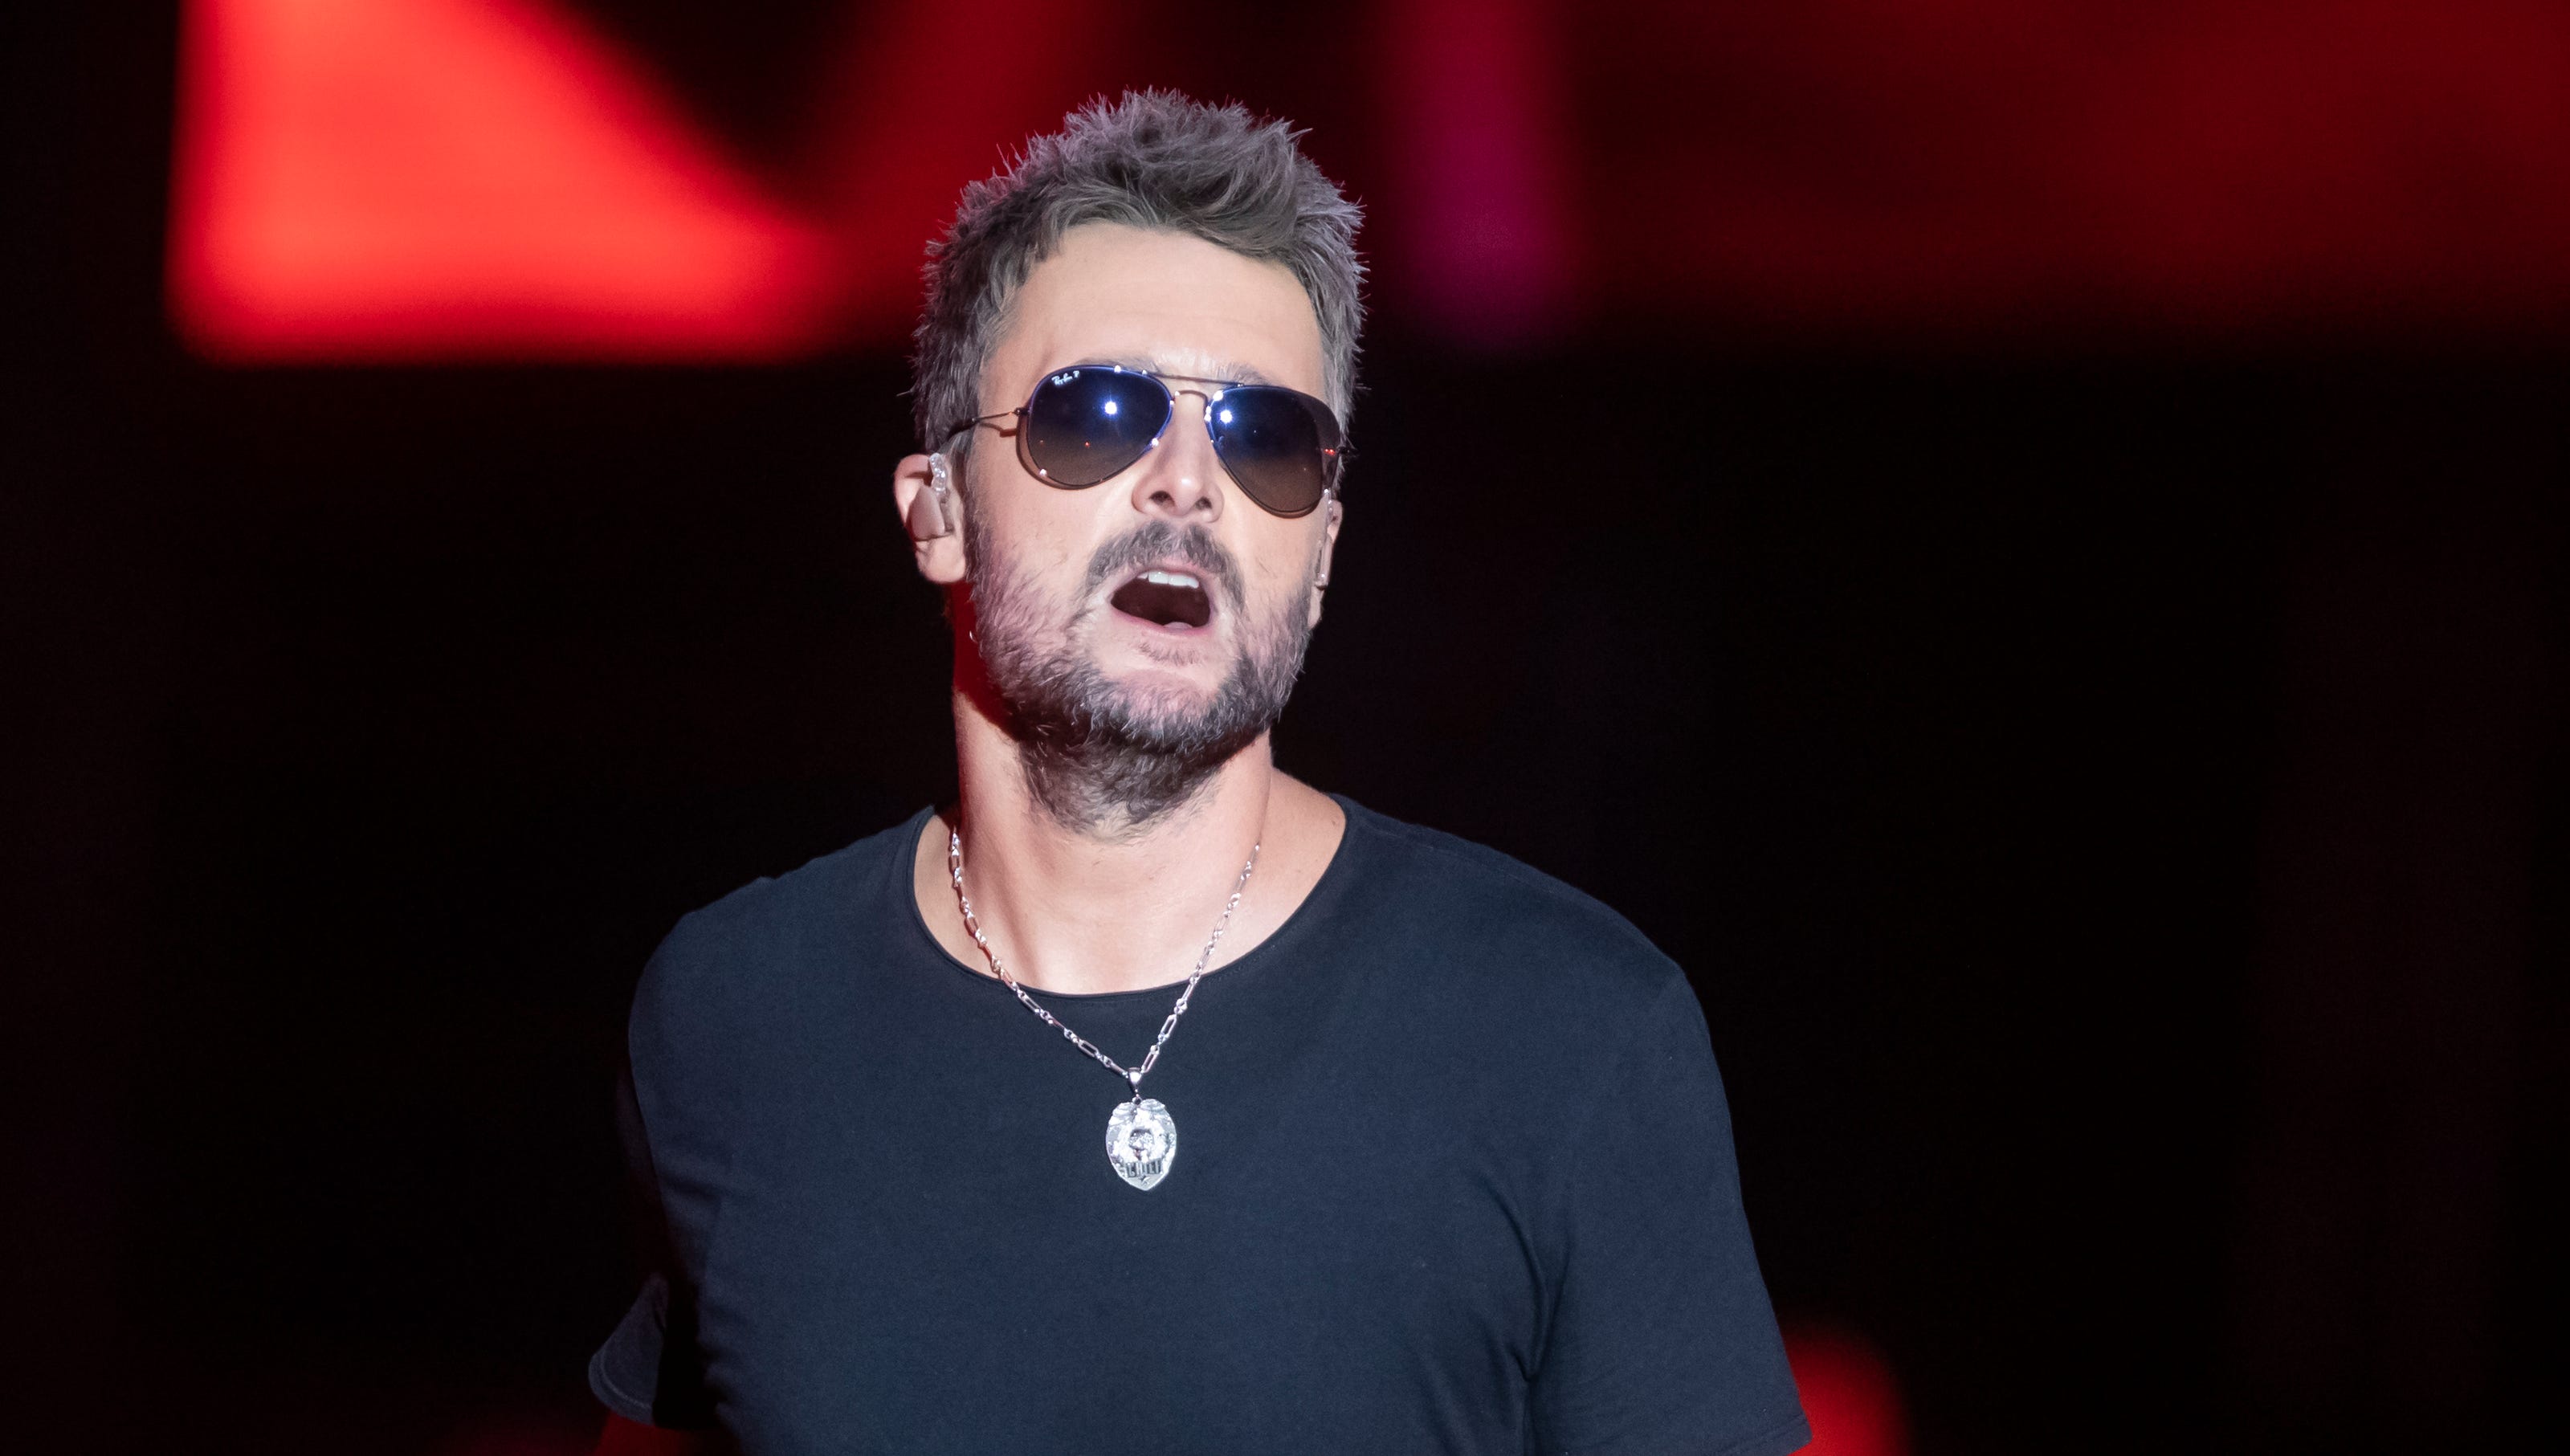 Eric Church on the creative 'boot camp' that fueled 'Heart & Soul'